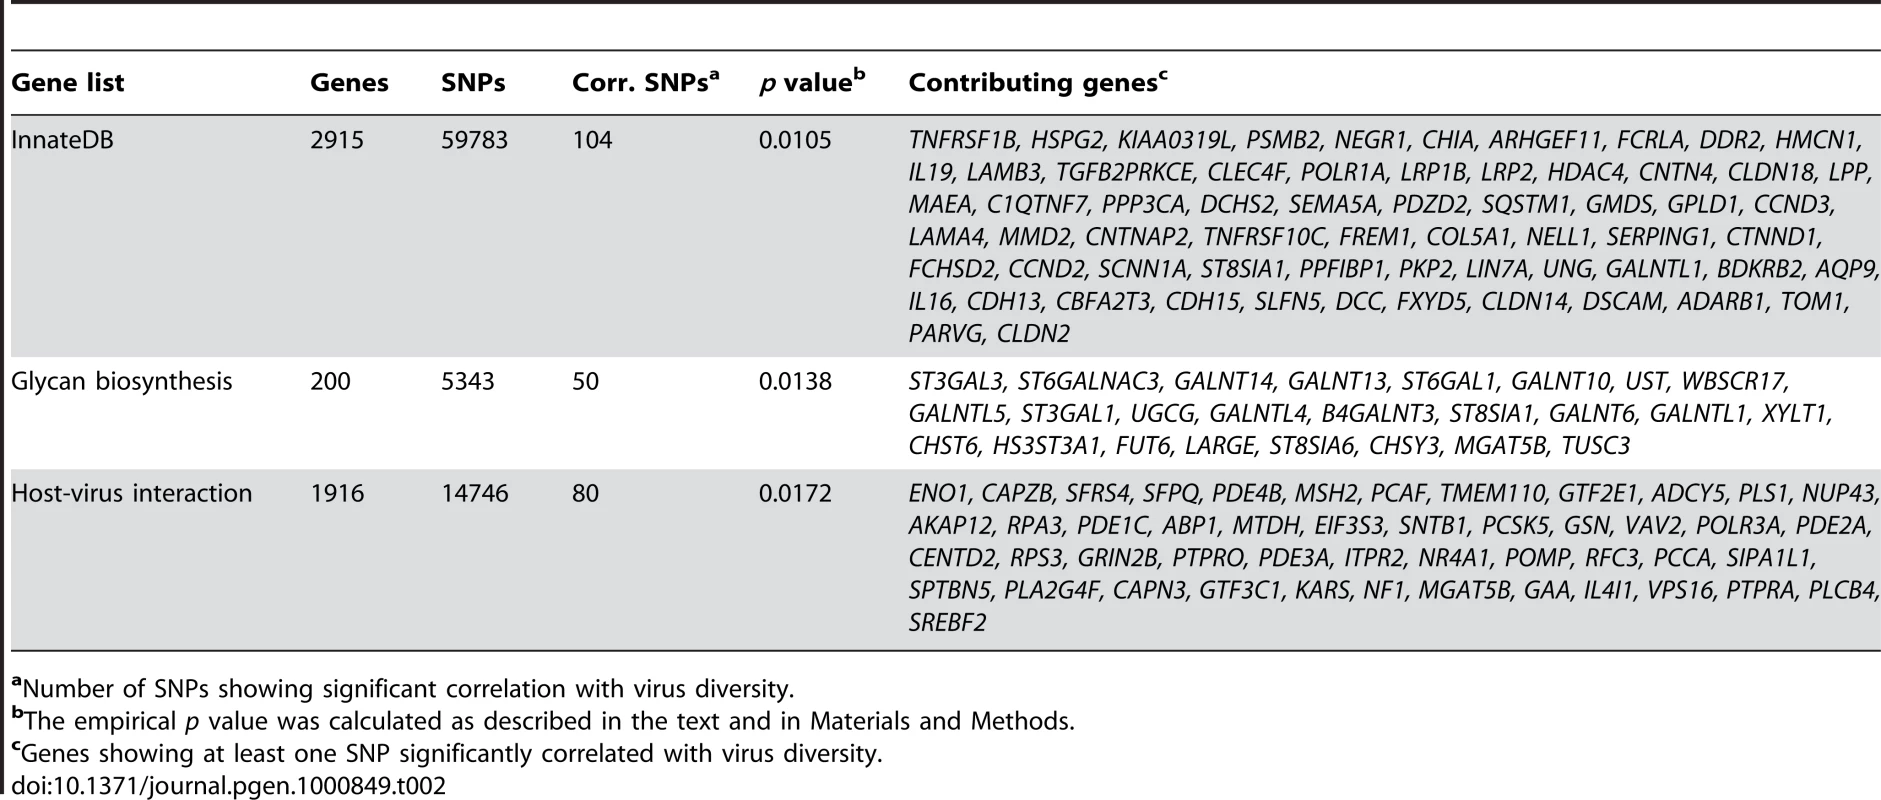 Enrichment of SNPs significantly associated with virus diversity in different gene lists.